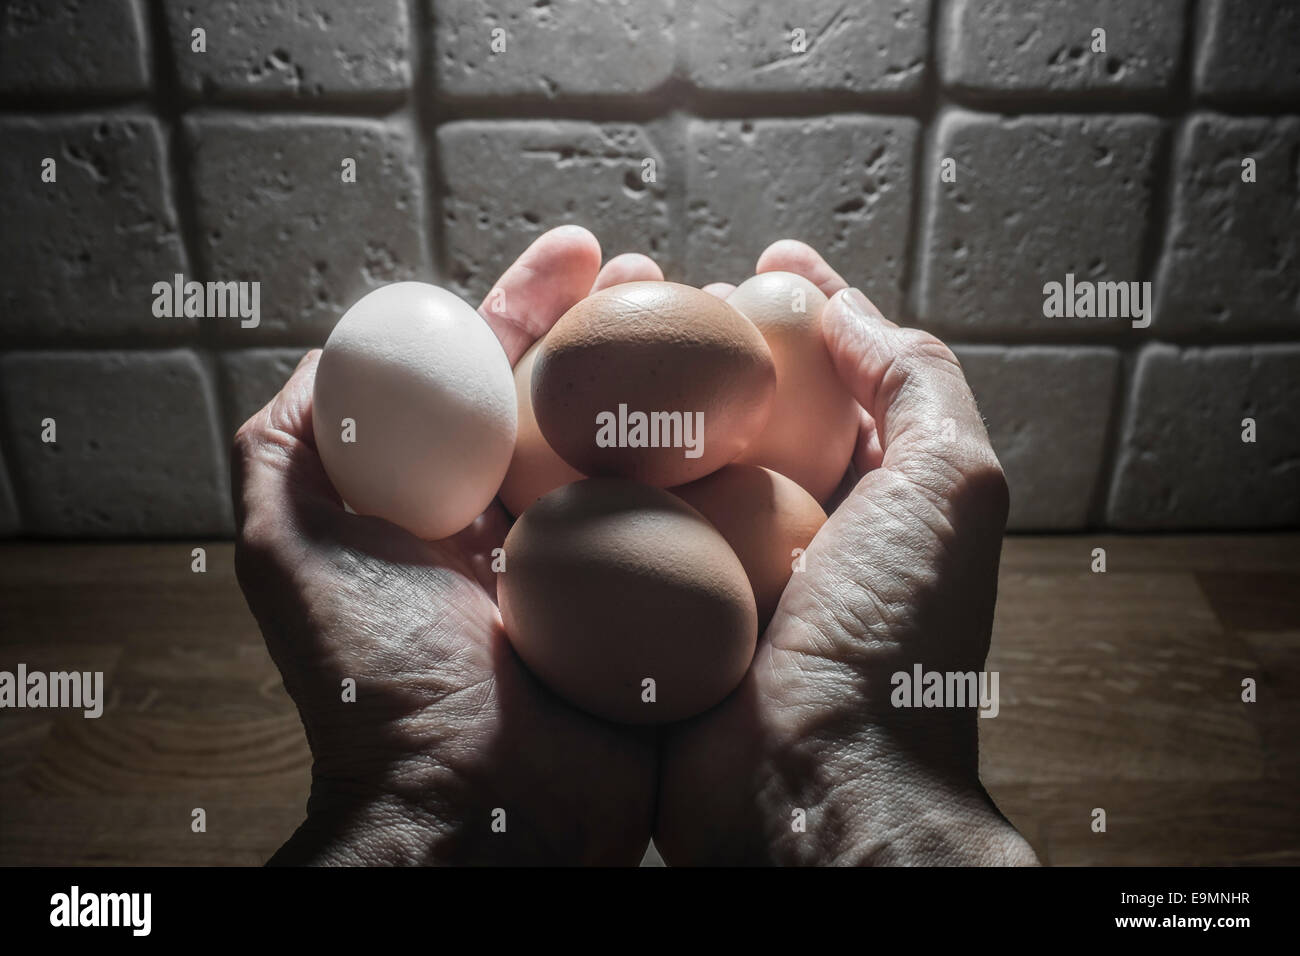 Cupped hands holding free range chicken eggs. Stock Photo